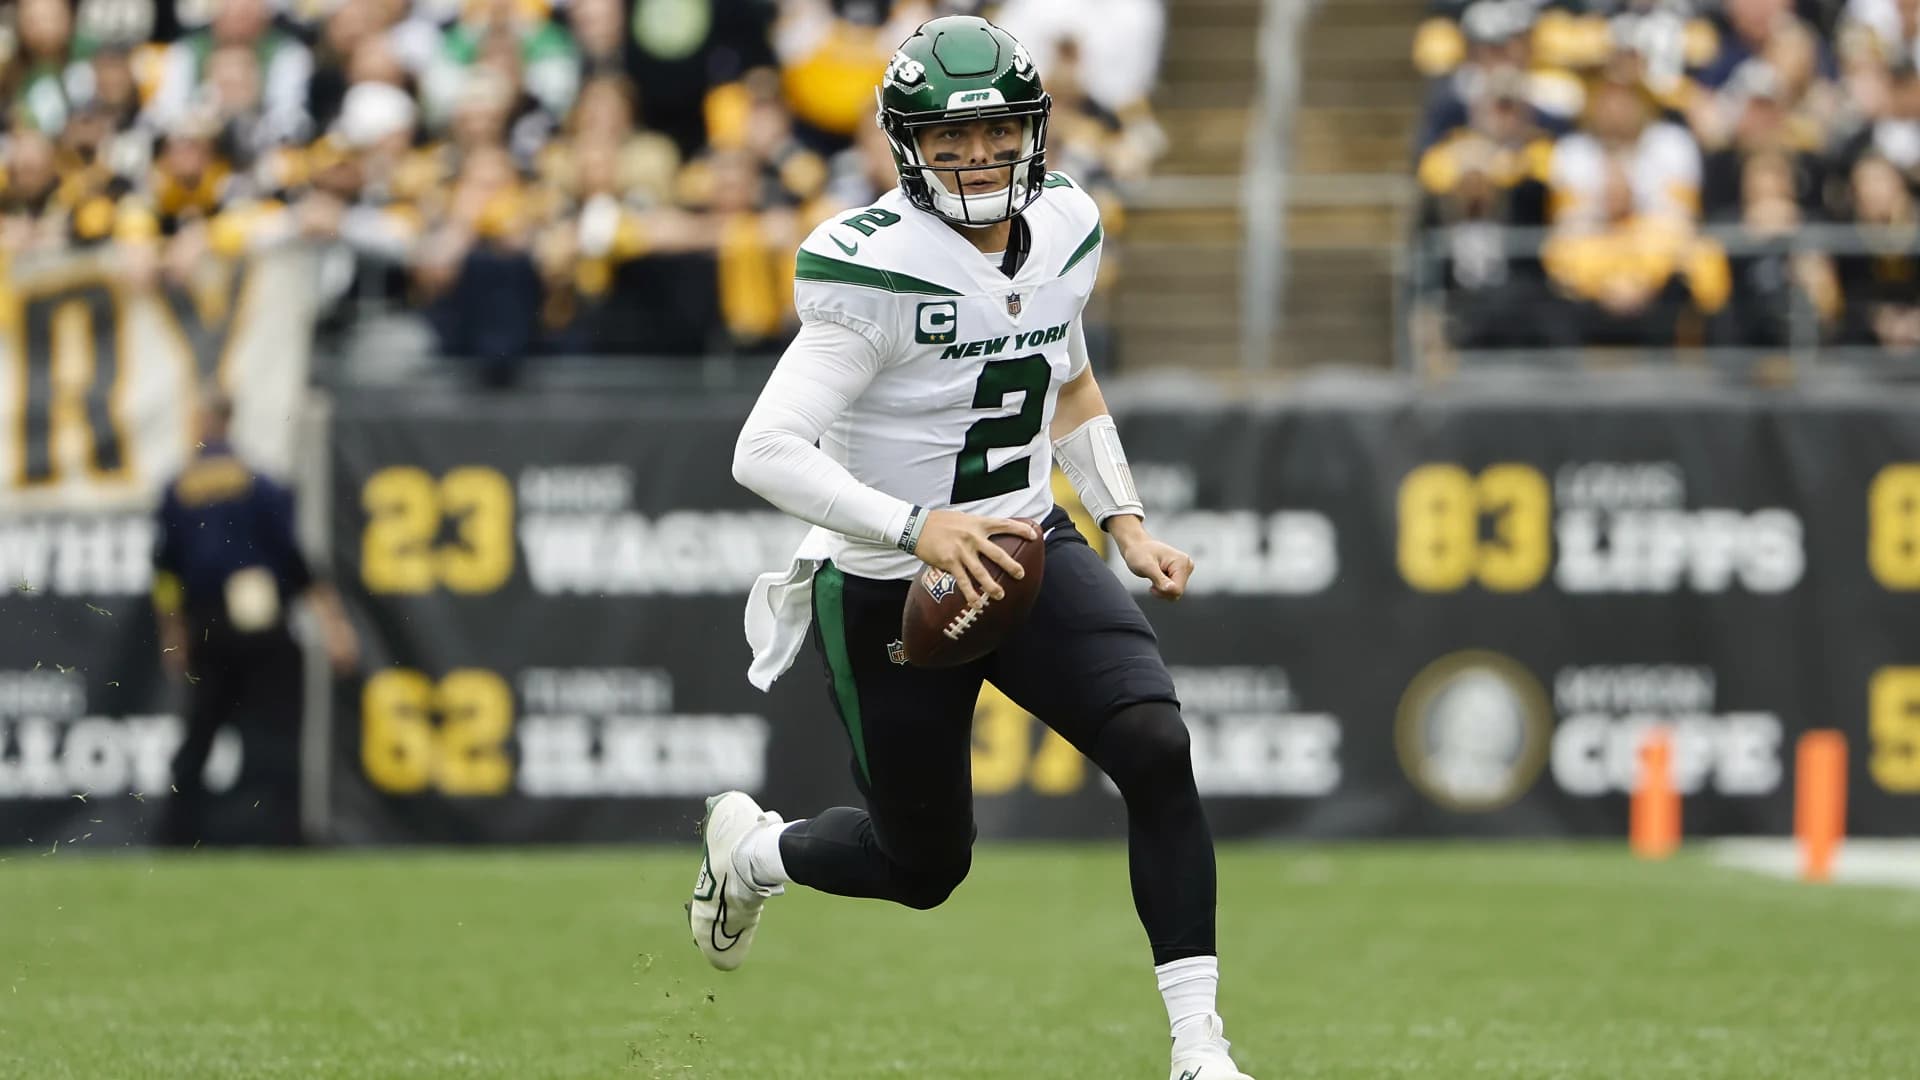 Jets QB Wilson hopes to build off big finish in season debut